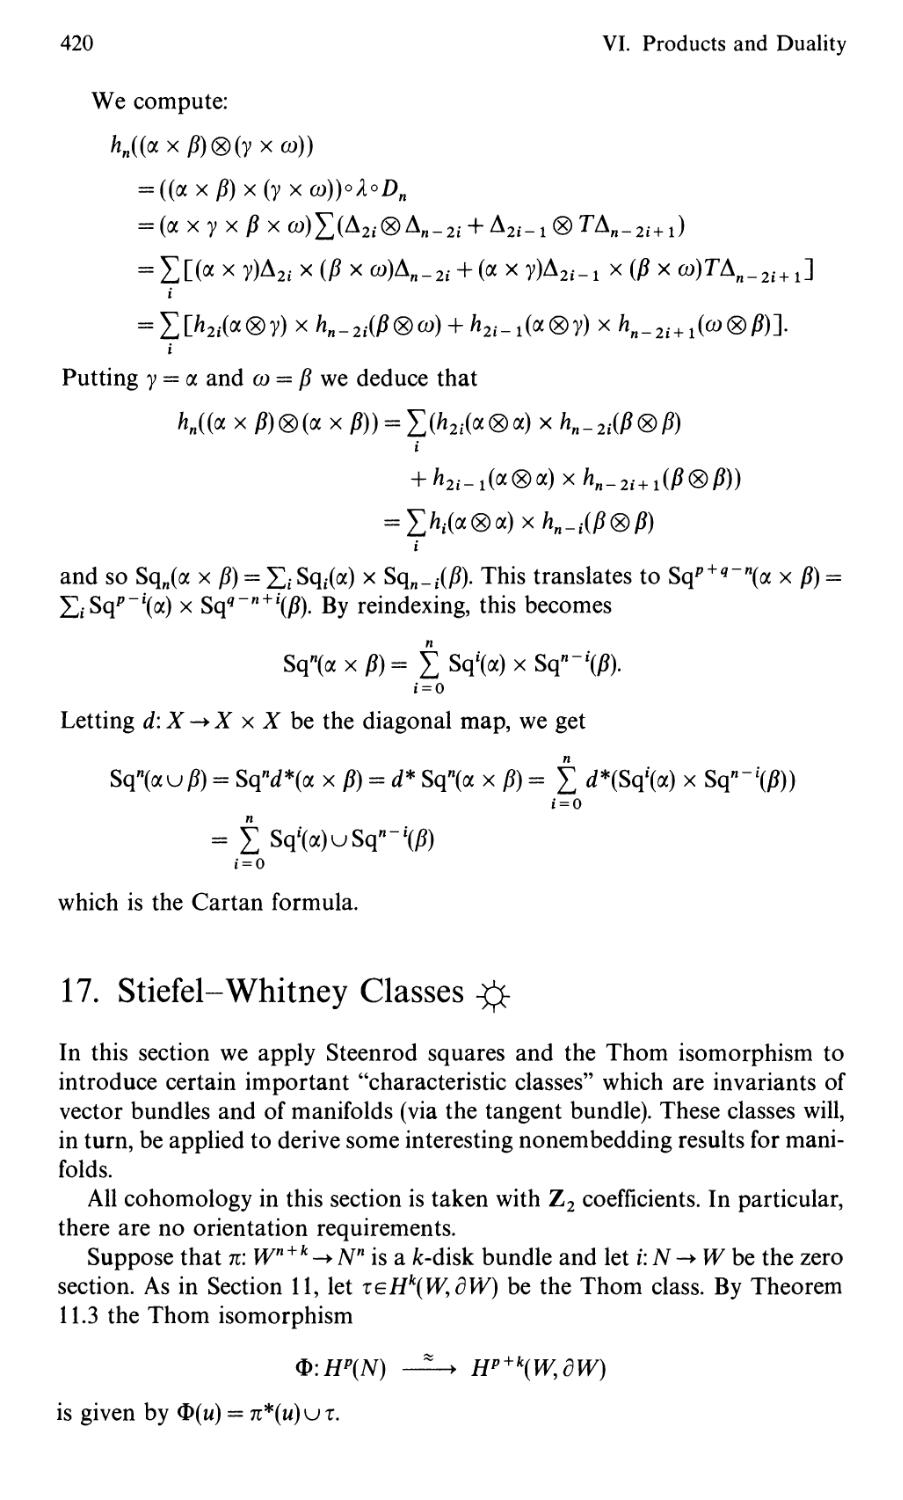 17. Stiefel-Whitney Classes